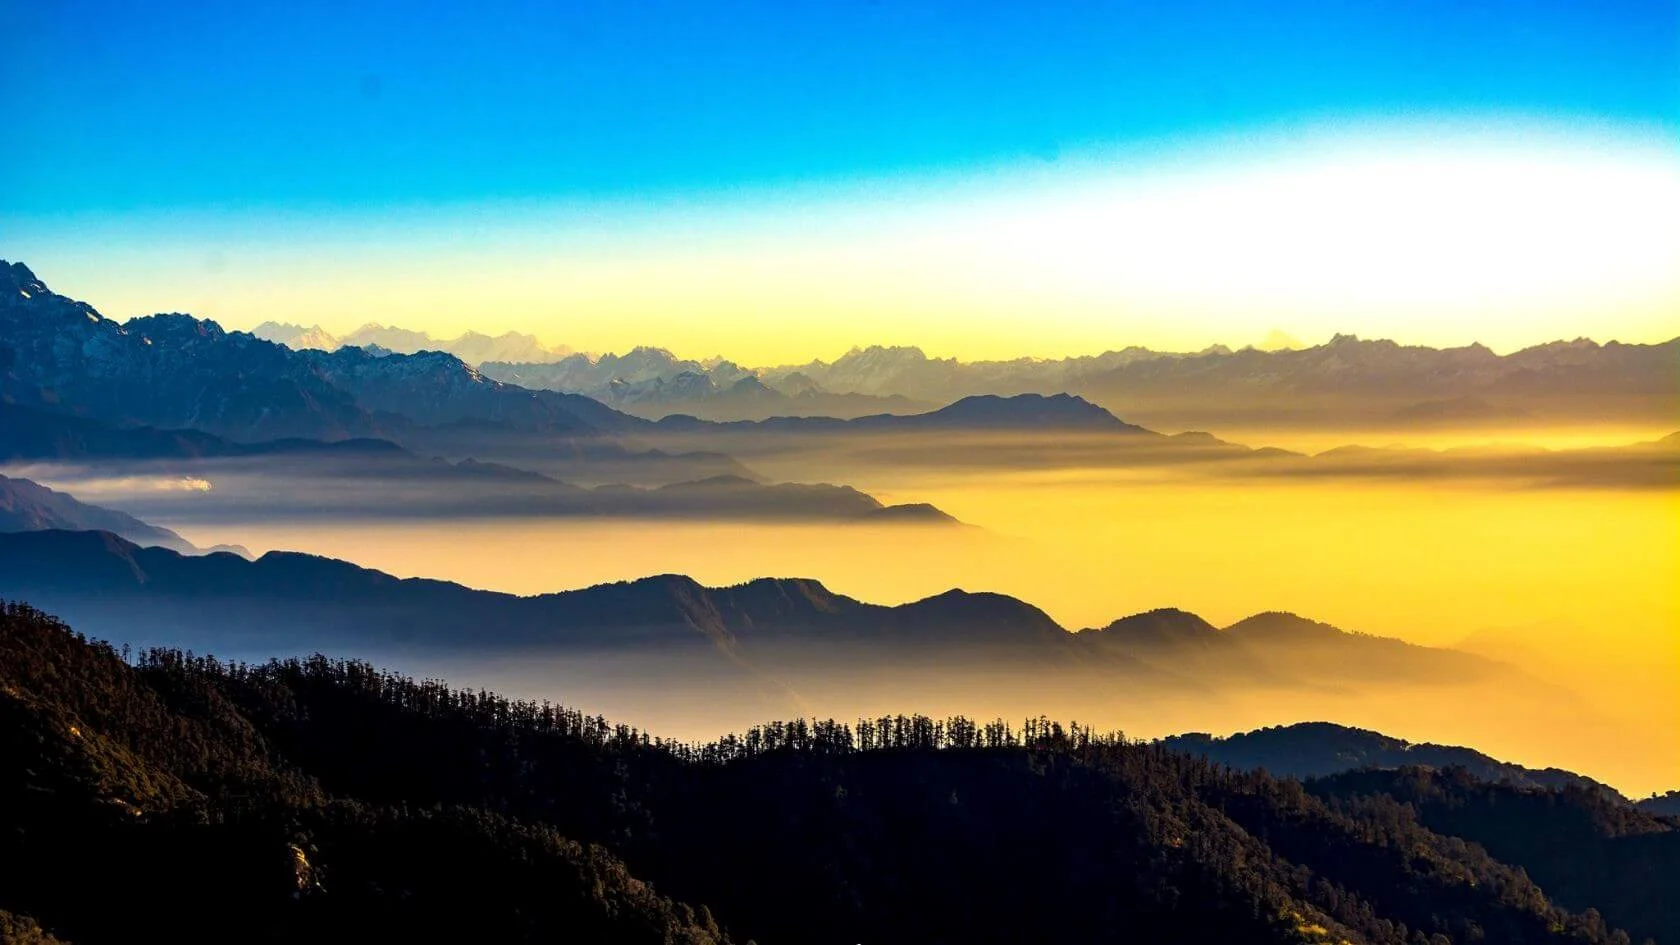 A foggy valley with mountains in the background during the yellow and orange sunset of Darjeeling. The mountains are shrouded in mist showing one of the best times to visit Darjeeling.